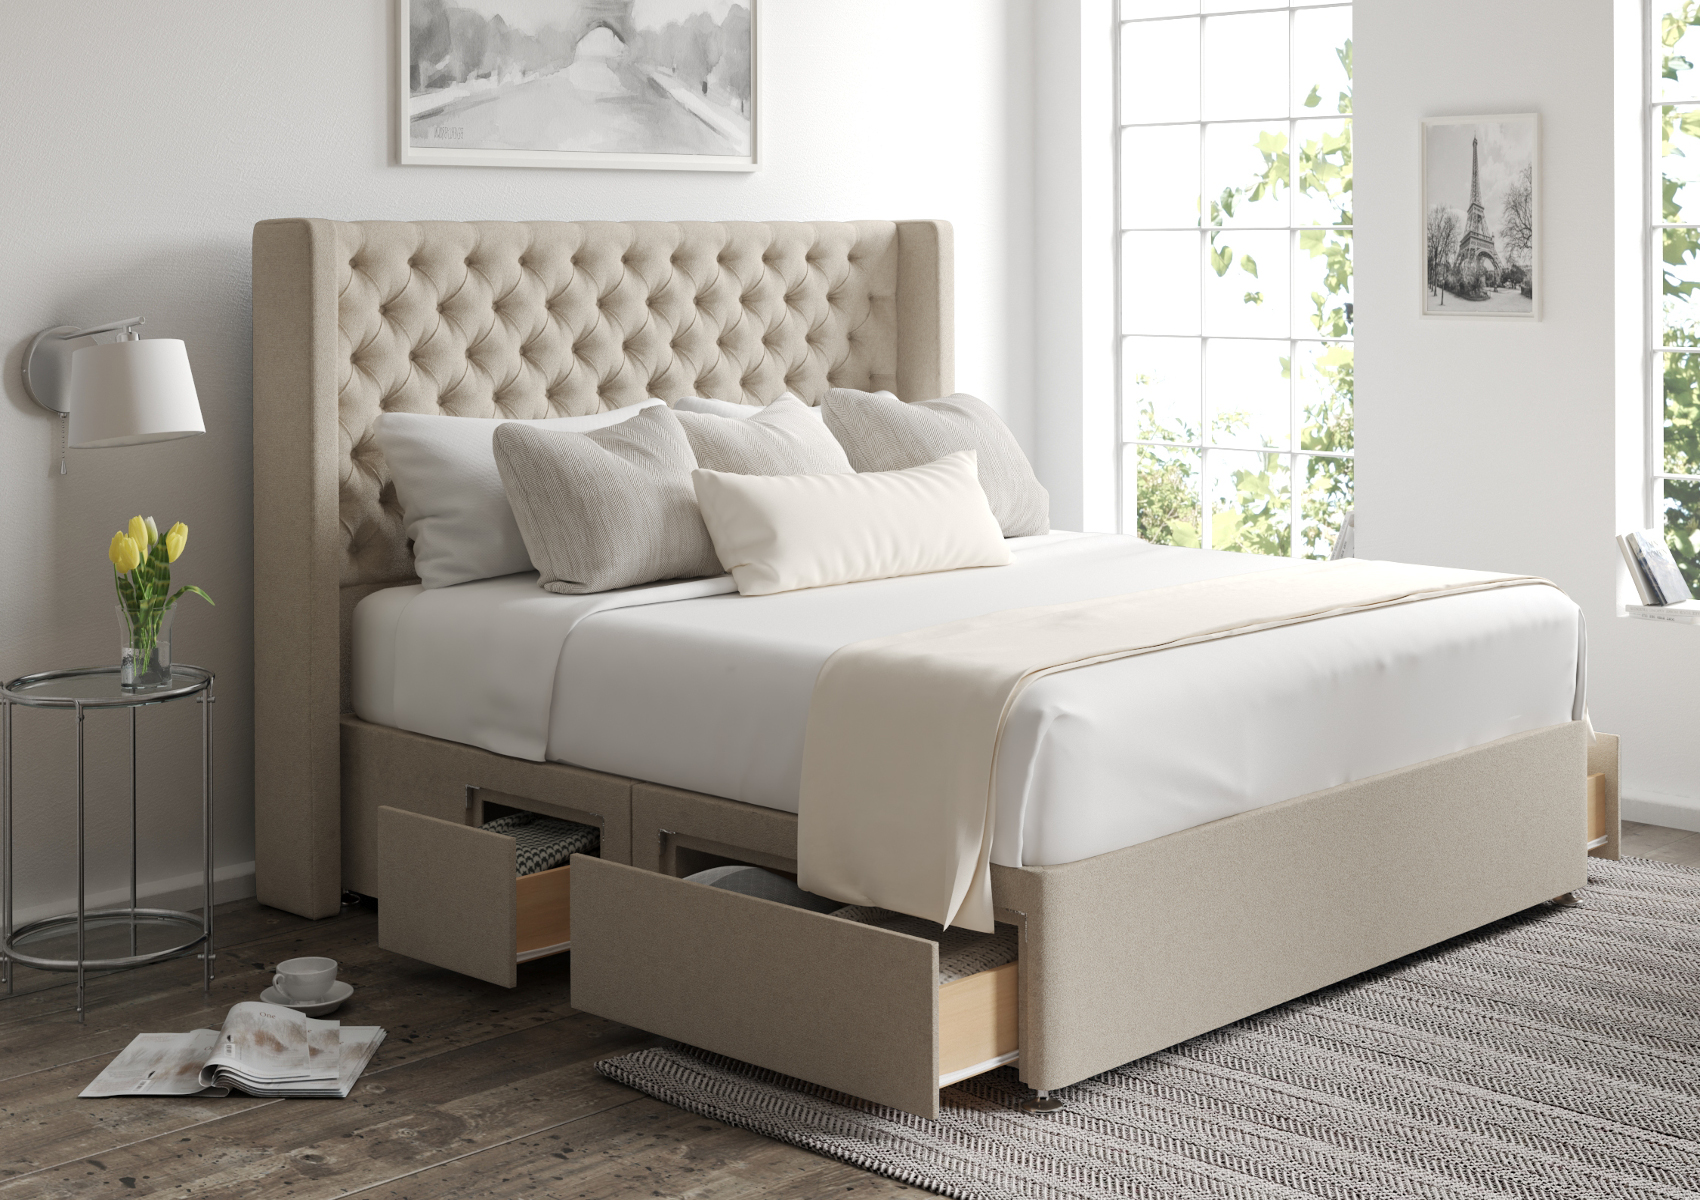 View Bella Arran Pebble Upholstered King Size Bed Time4Sleep information